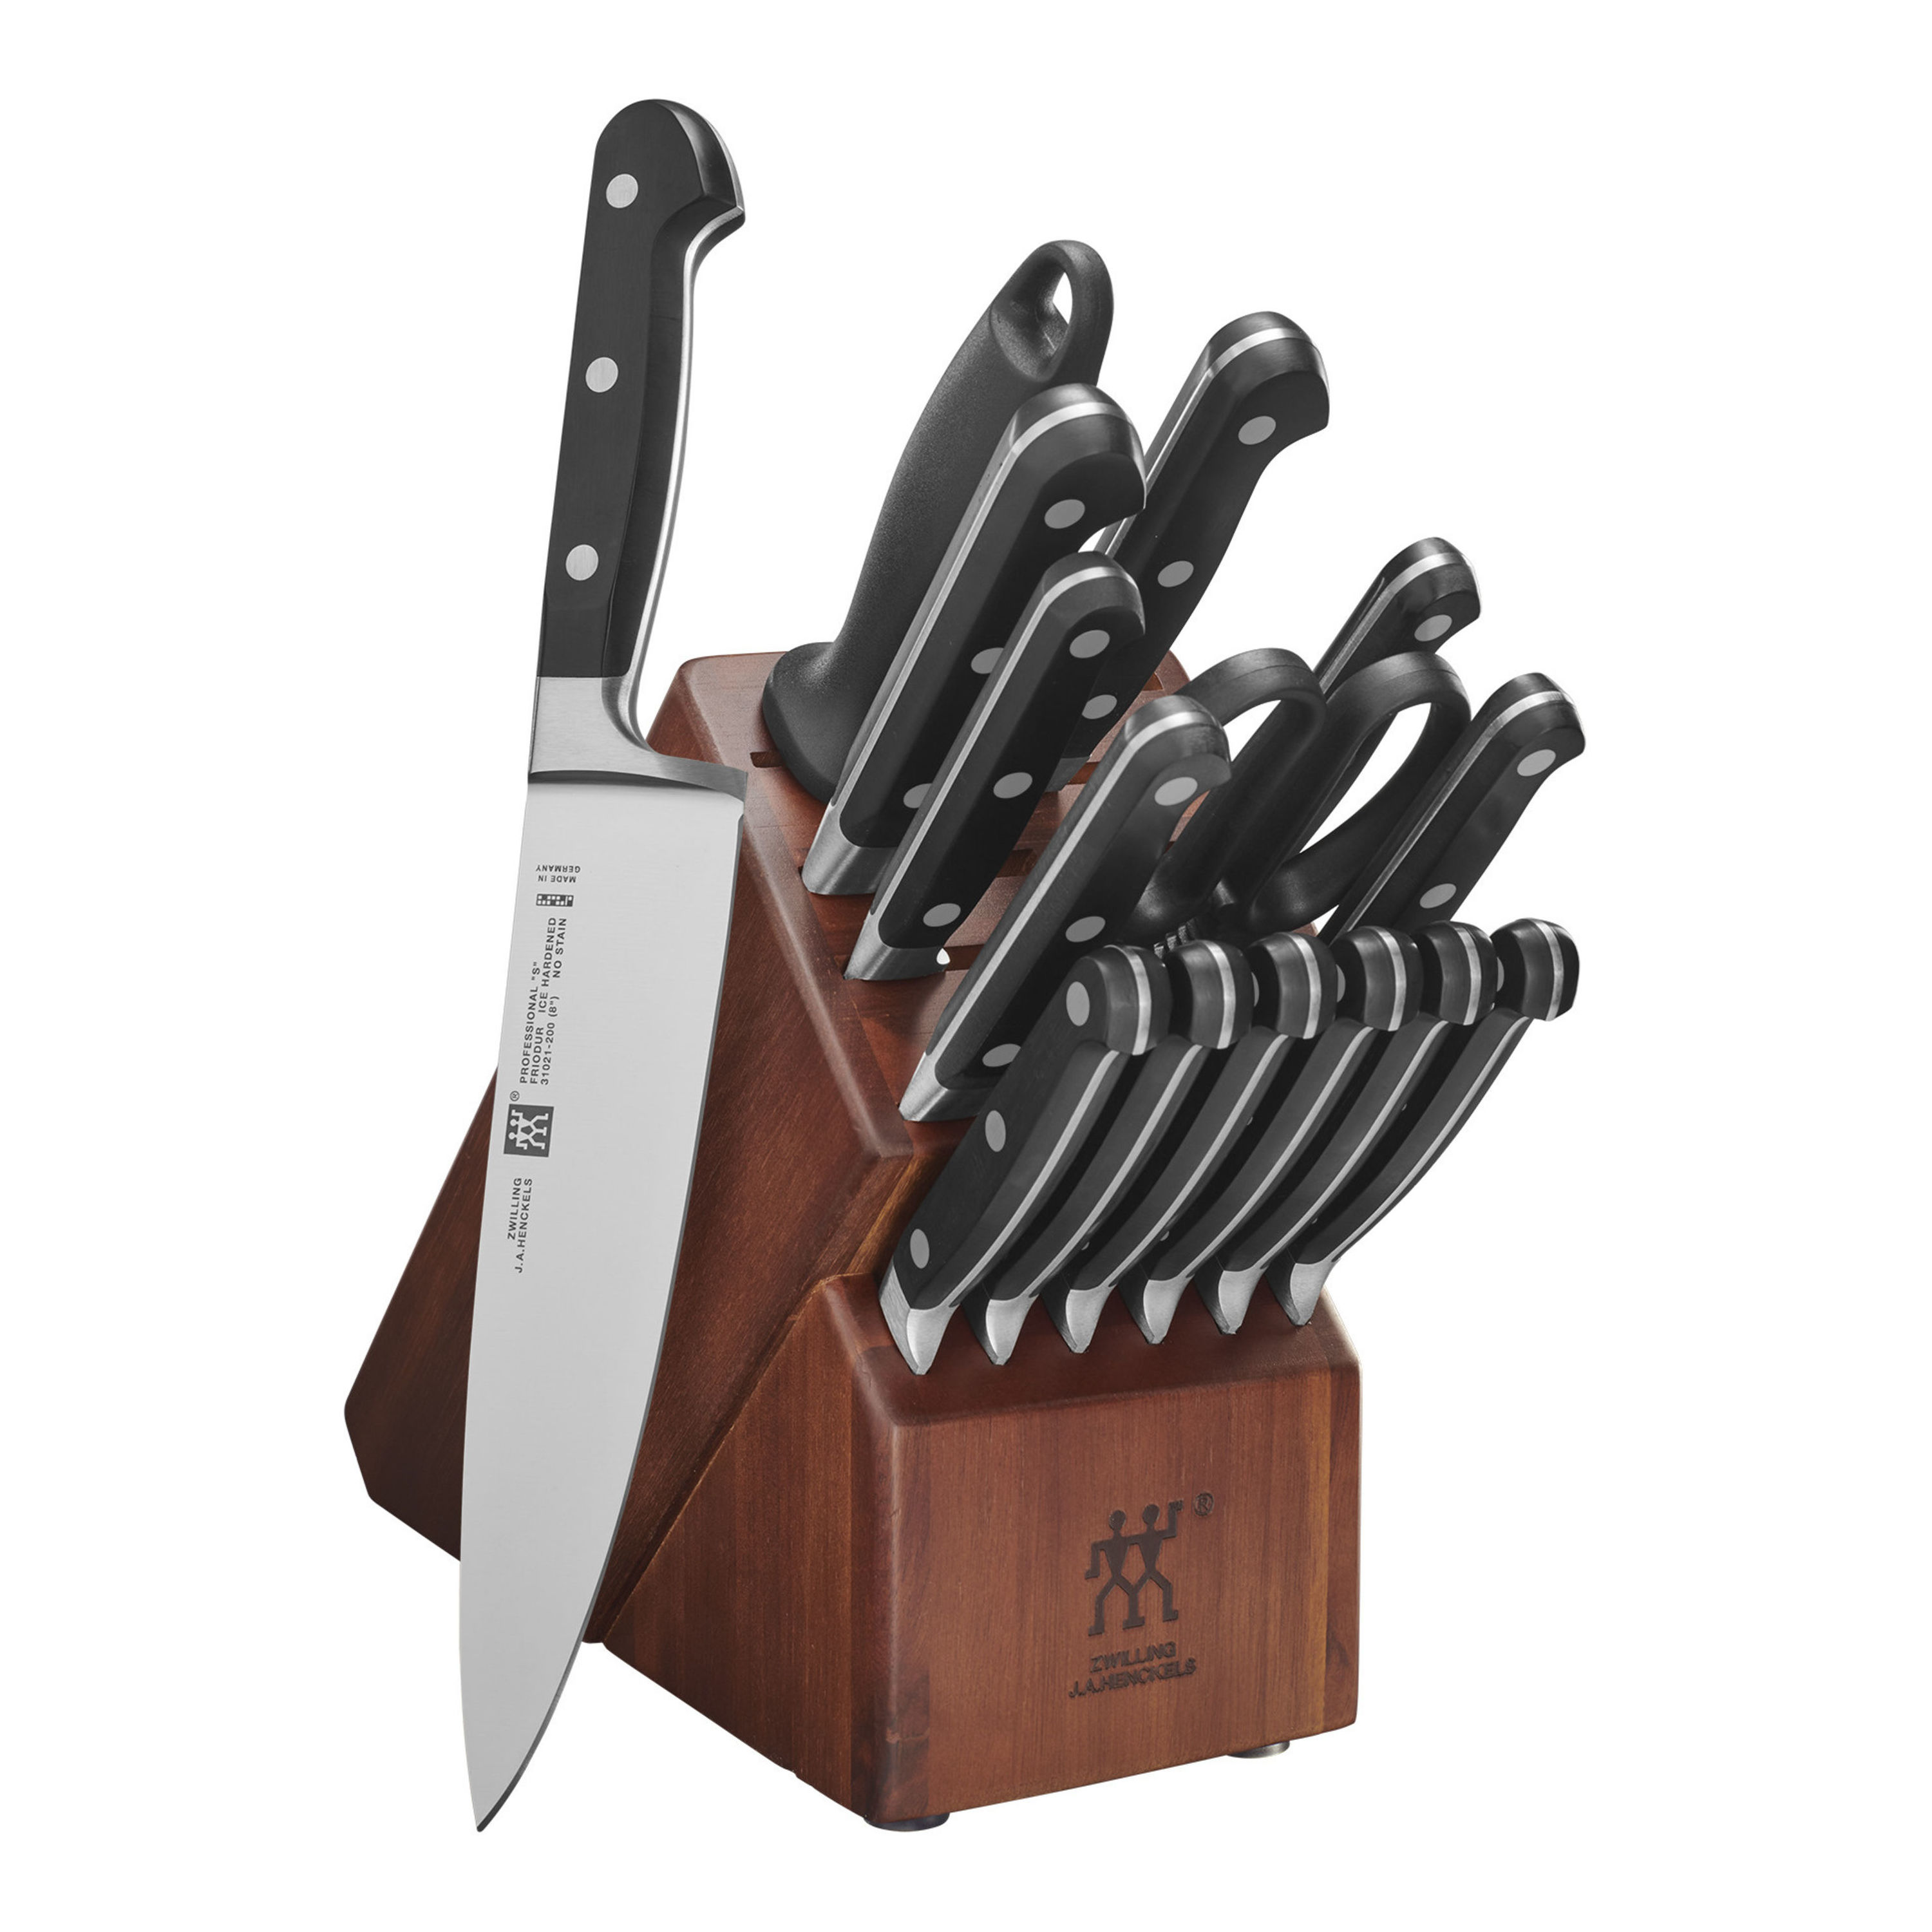 FOREVER SHARP Profesional Food Service knife set Series 6 pc brand